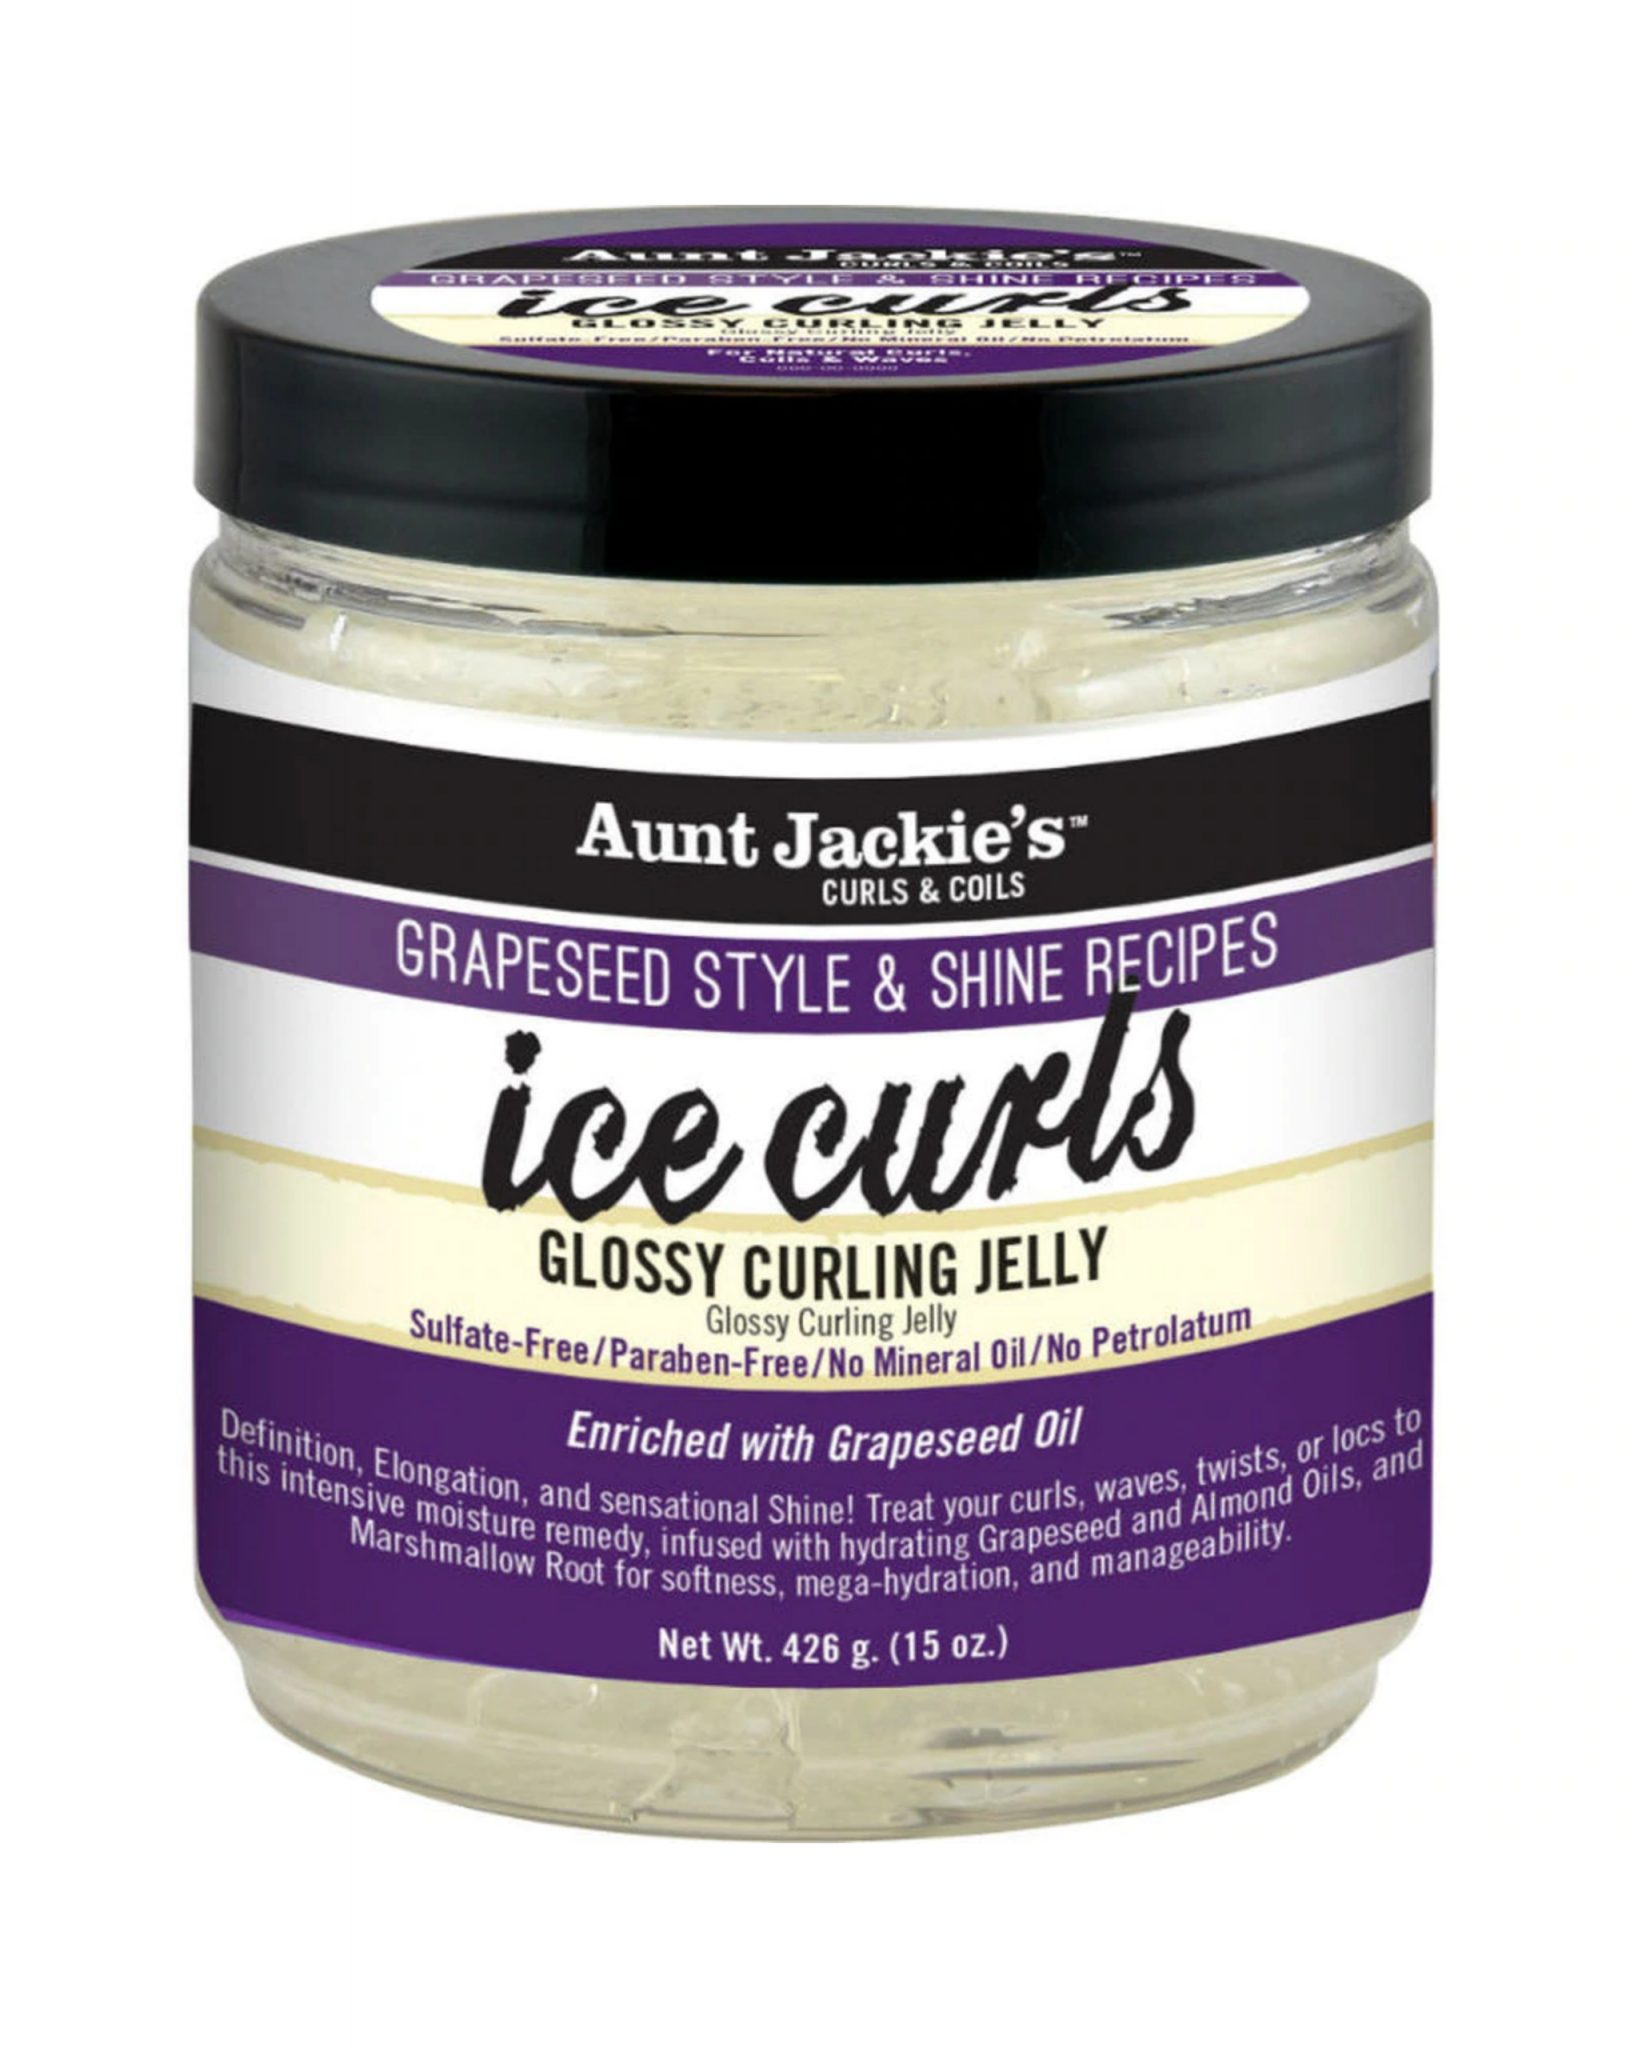 Aunt Jackie’s Grapeseed Style & Shine Recipes ICE CURLS! glossy curling jelly